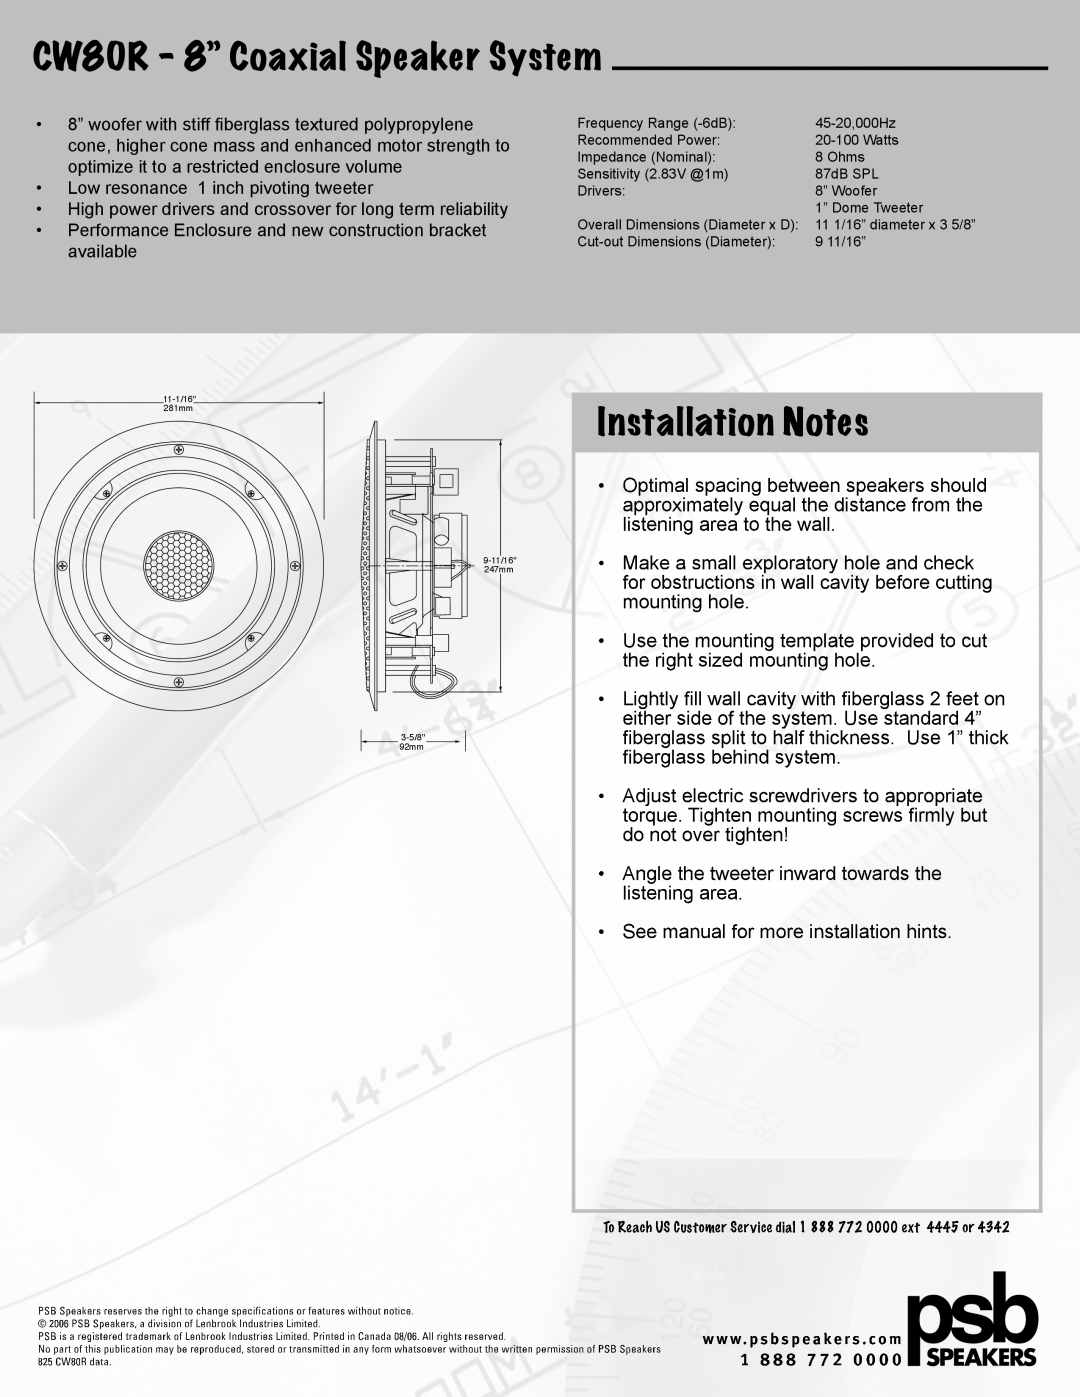 PSB Speakers manual CW80R - 8” Coaxial Speaker System, Installation Notes 